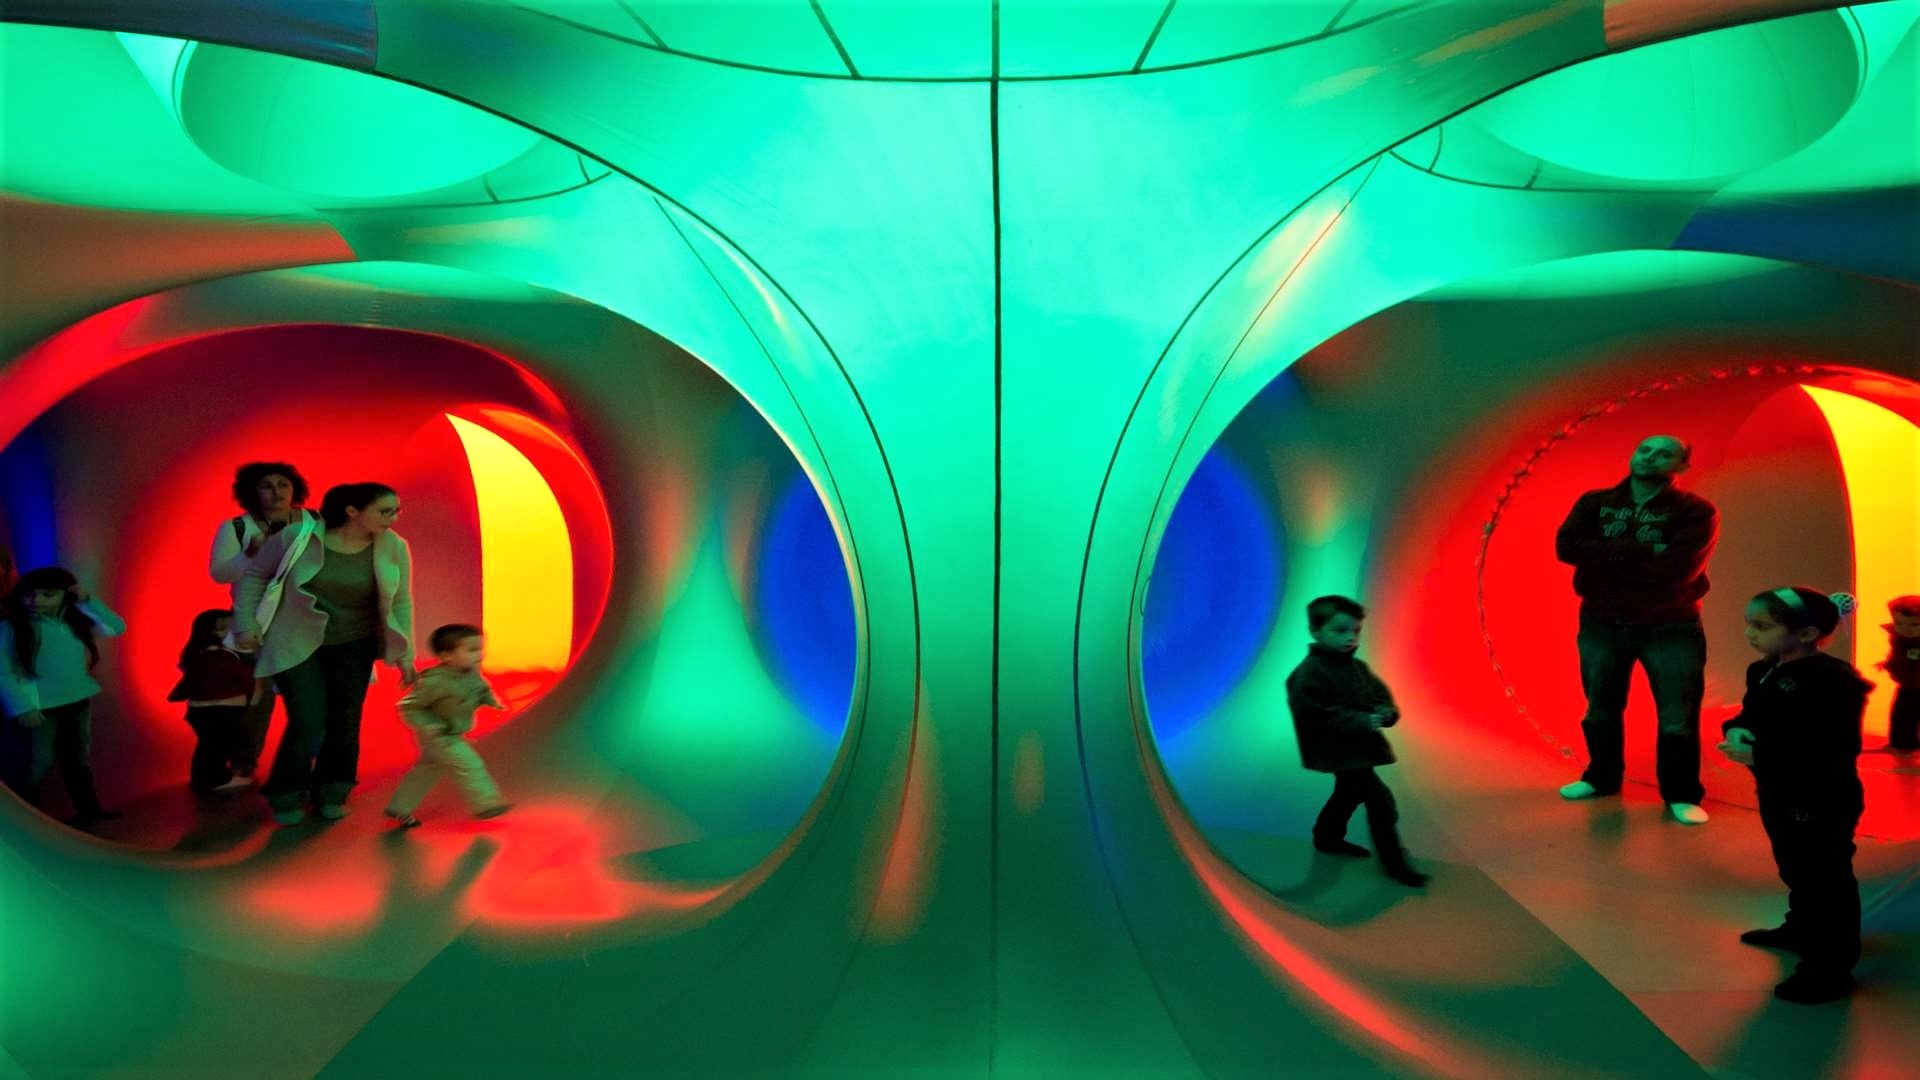 A photo of some family's experiencing a colourful indoor exhibit